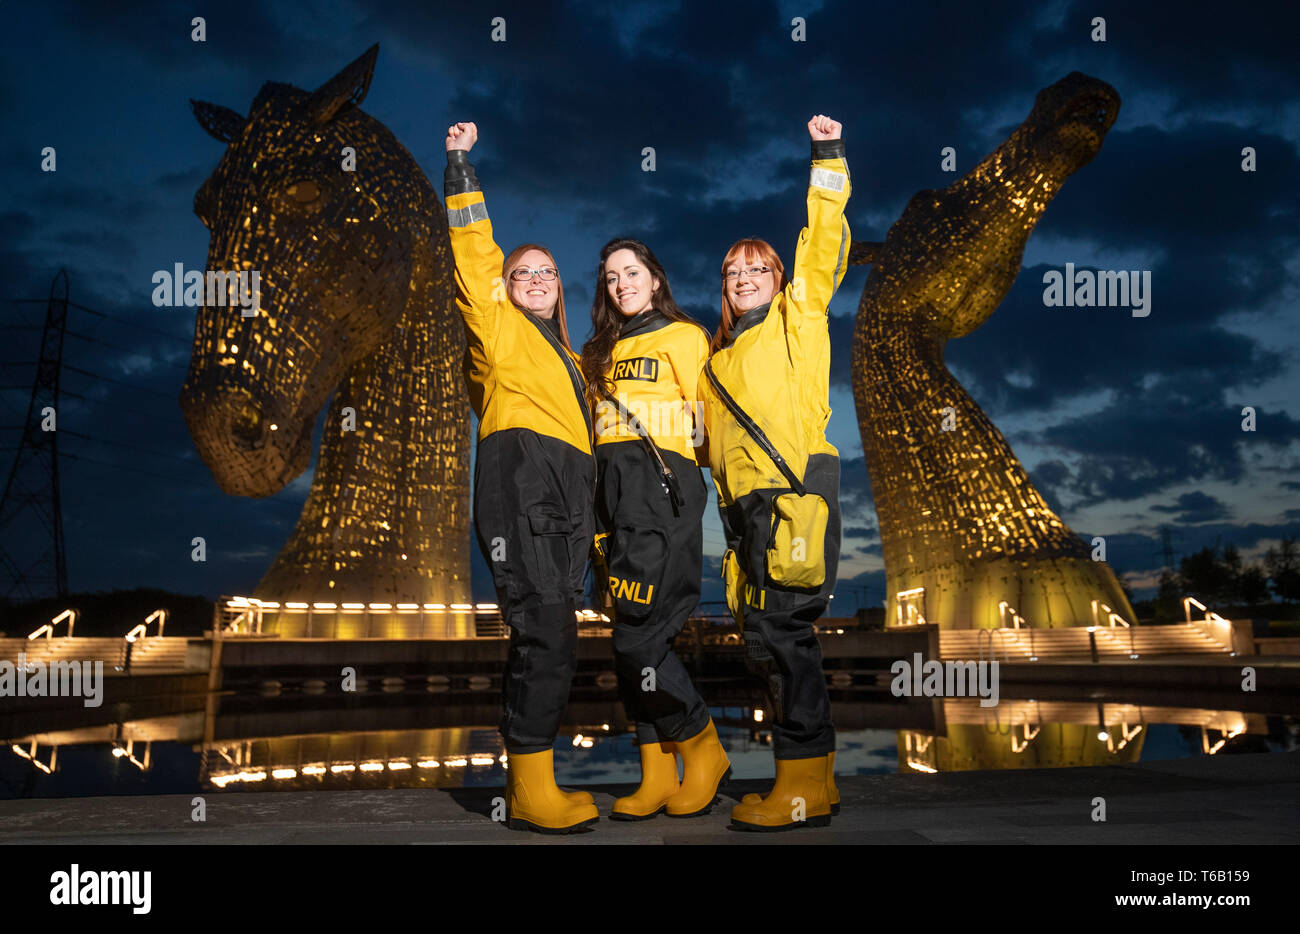 Members of the Queensferry crew (left to right) Adele Allan Arabella Kuszynska-Shields and Denise Tyler help launch the RNLI's 2019 Mayday campaign in front of The Kelpies, Falkirk, which is one of several landmarks across Scotland lit up yellow. Stock Photo